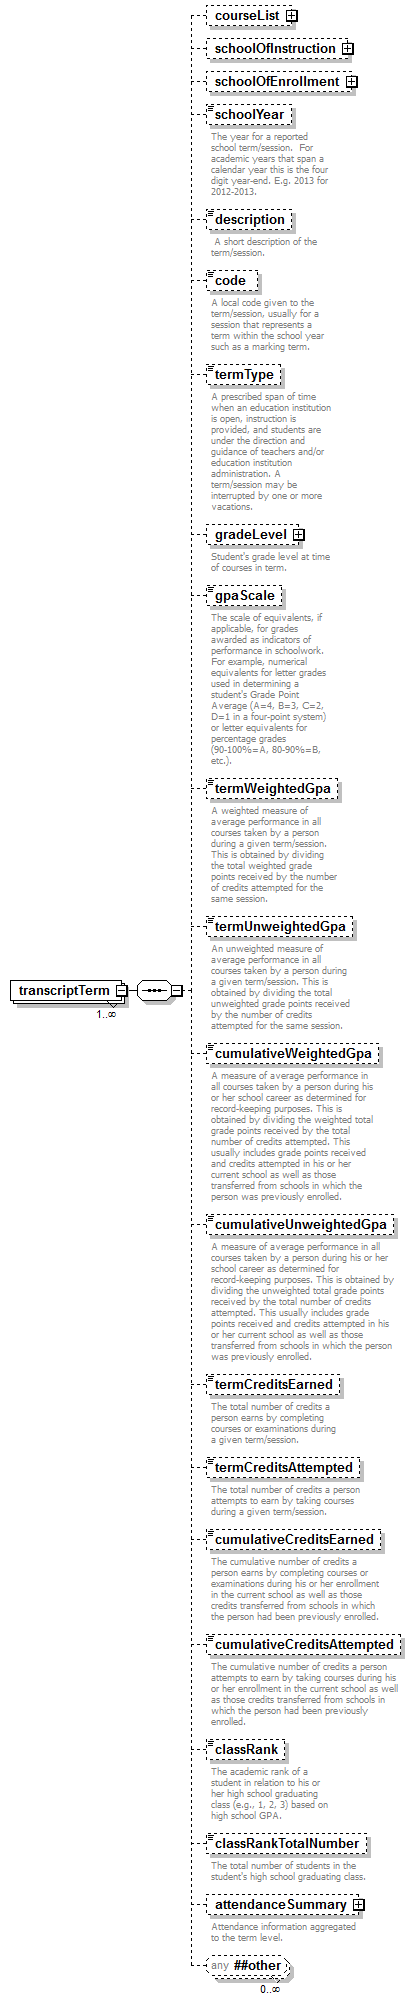 ReportObjects_diagrams/ReportObjects_p179.png